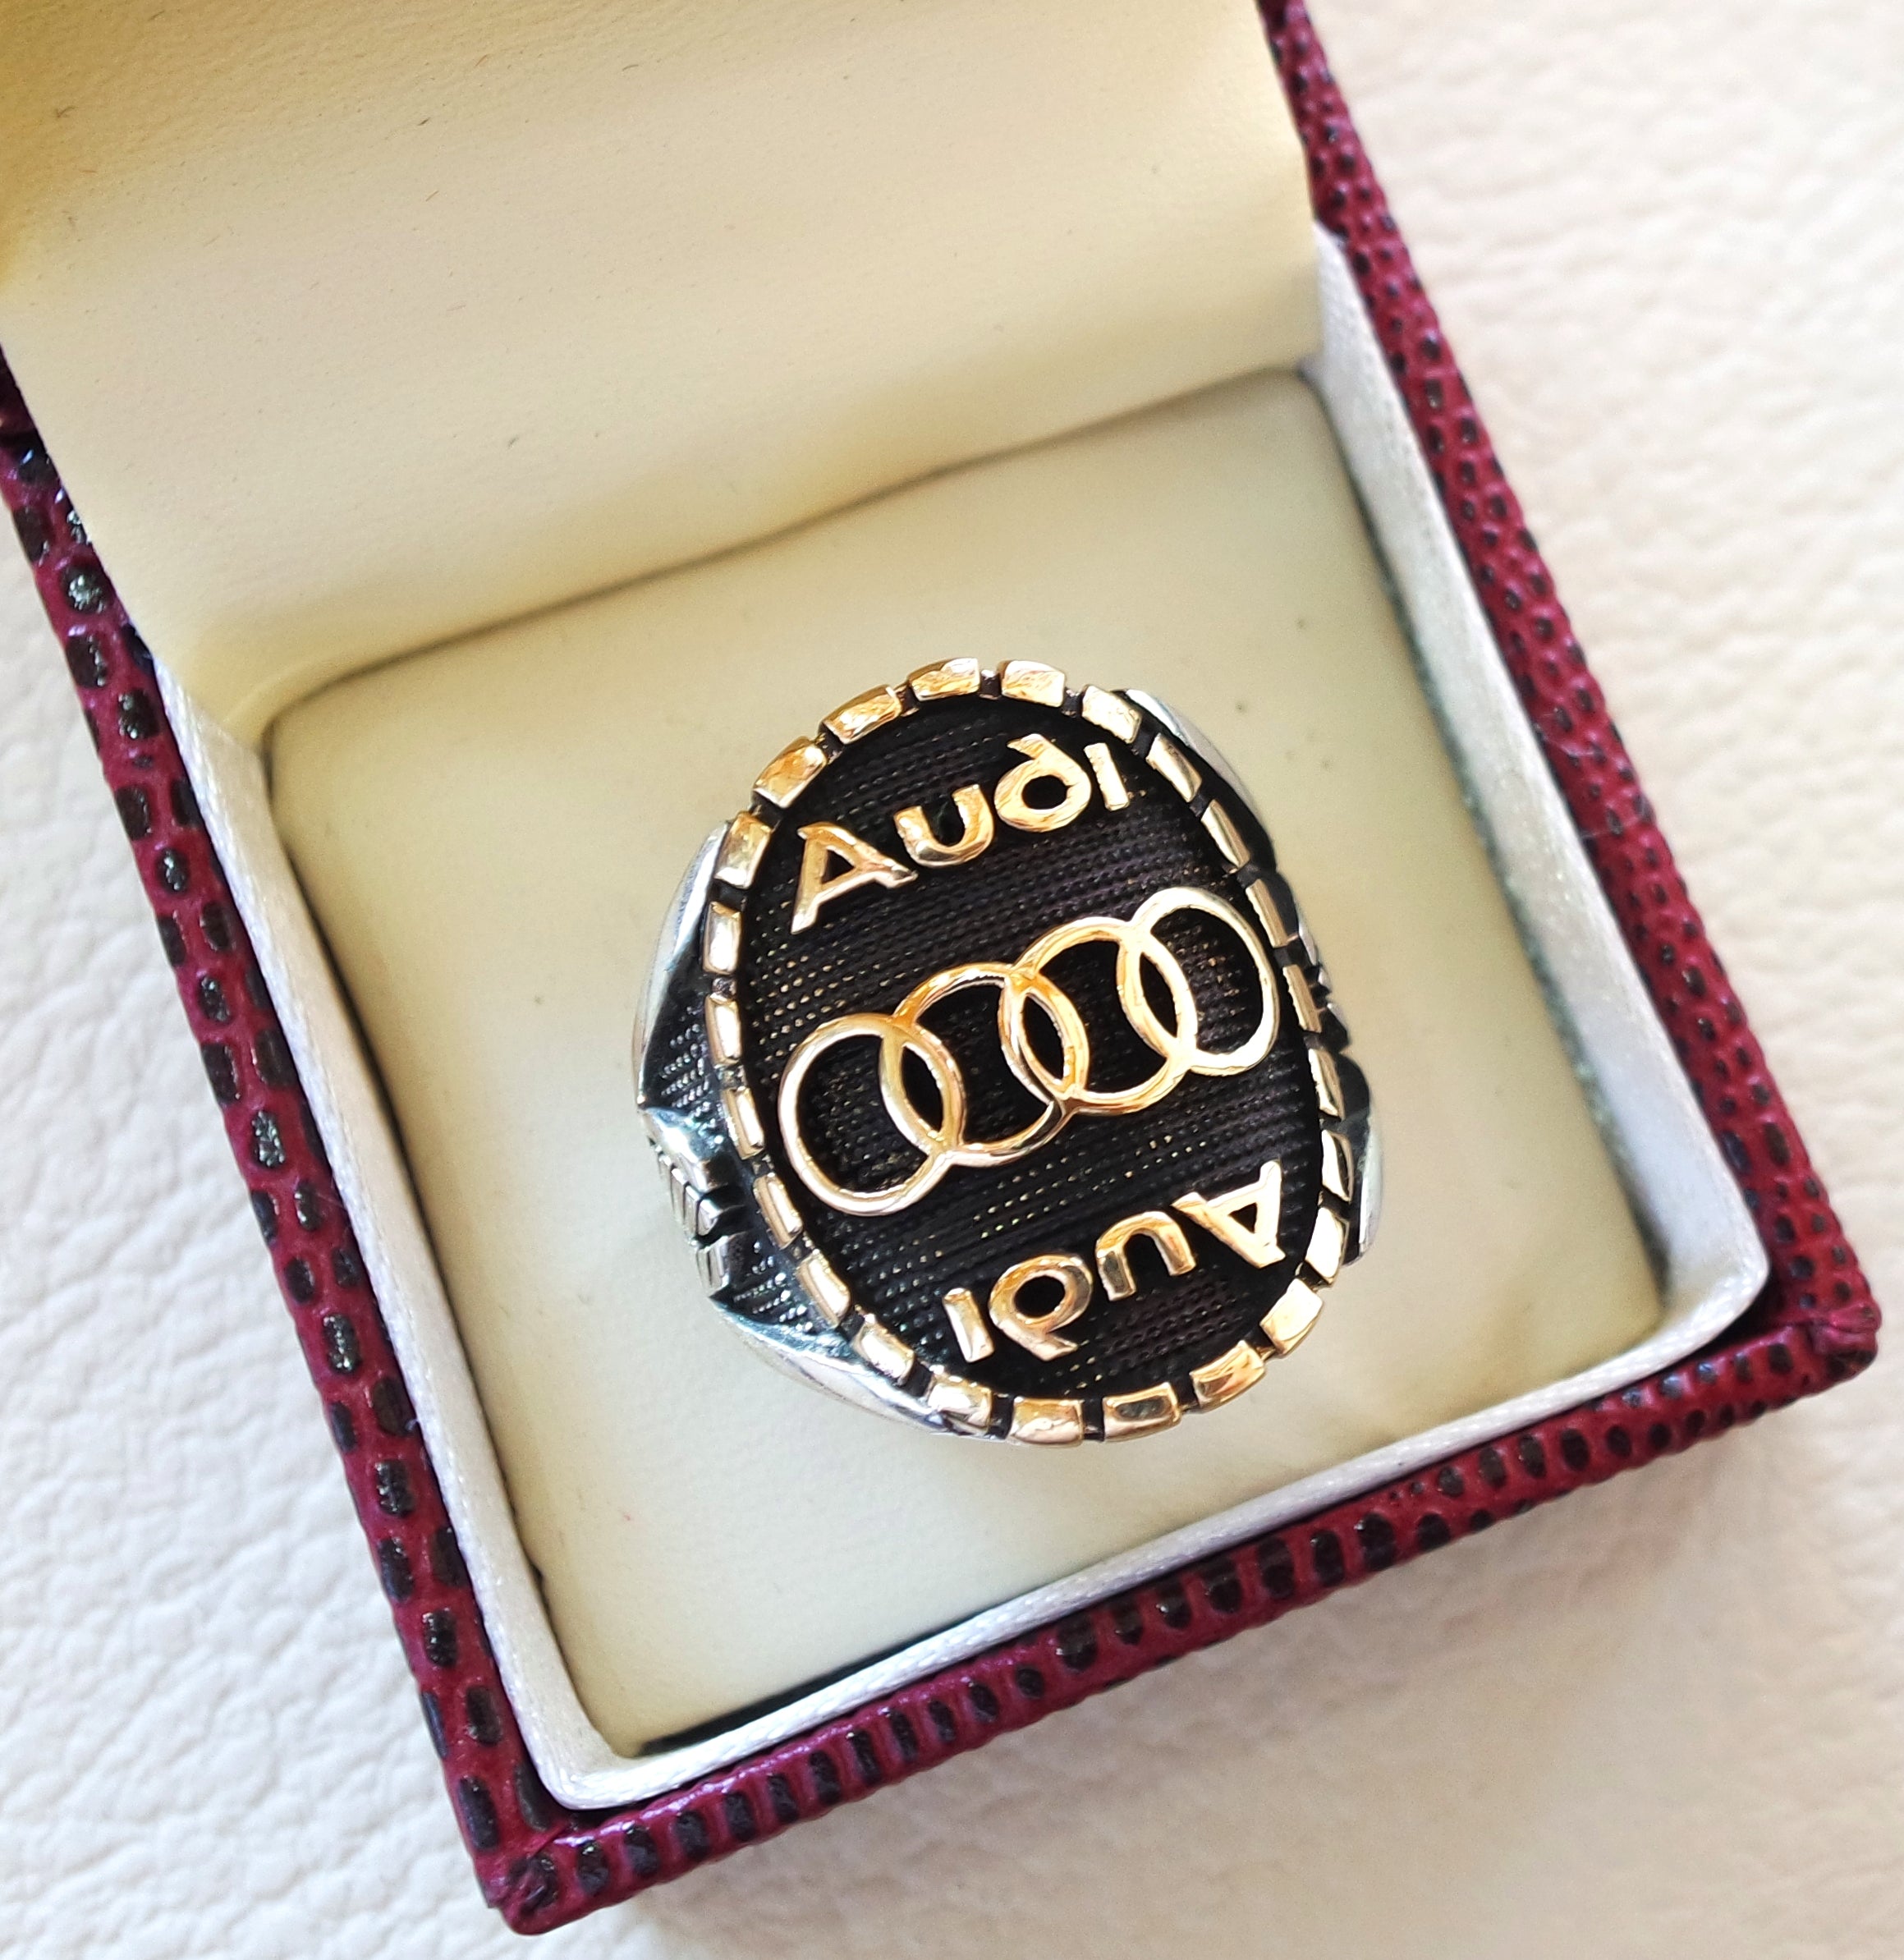 Audi sterling silver 925 and bronze heavy man ring new car ideal gift – Abu  Mariam Jewelry